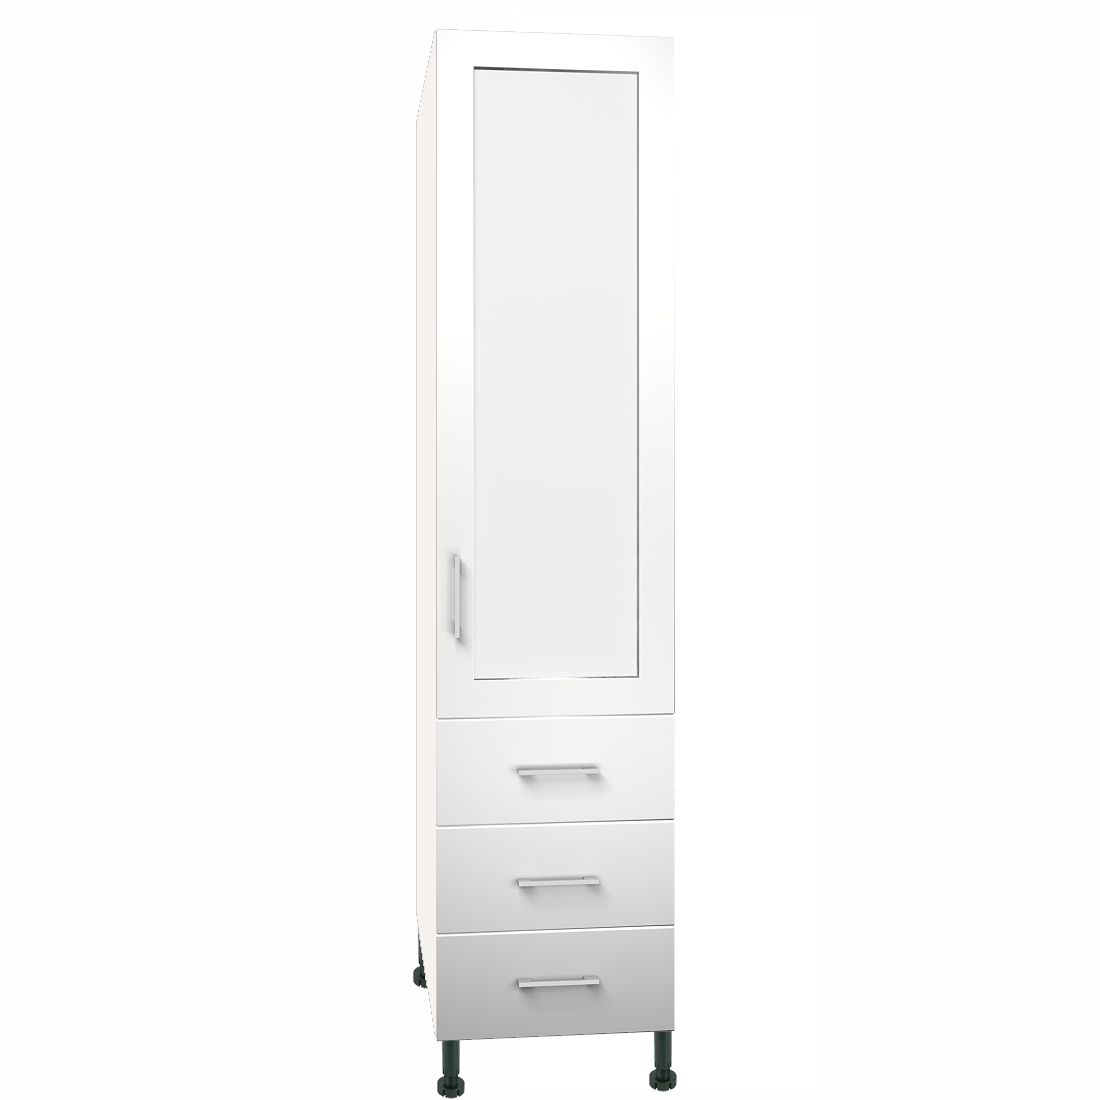 Single Wardrobe Mirrored Door 3 Drawers – Meon Acrylic – Paramount Bathrooms With Single White Wardrobes With Drawers (View 7 of 20)